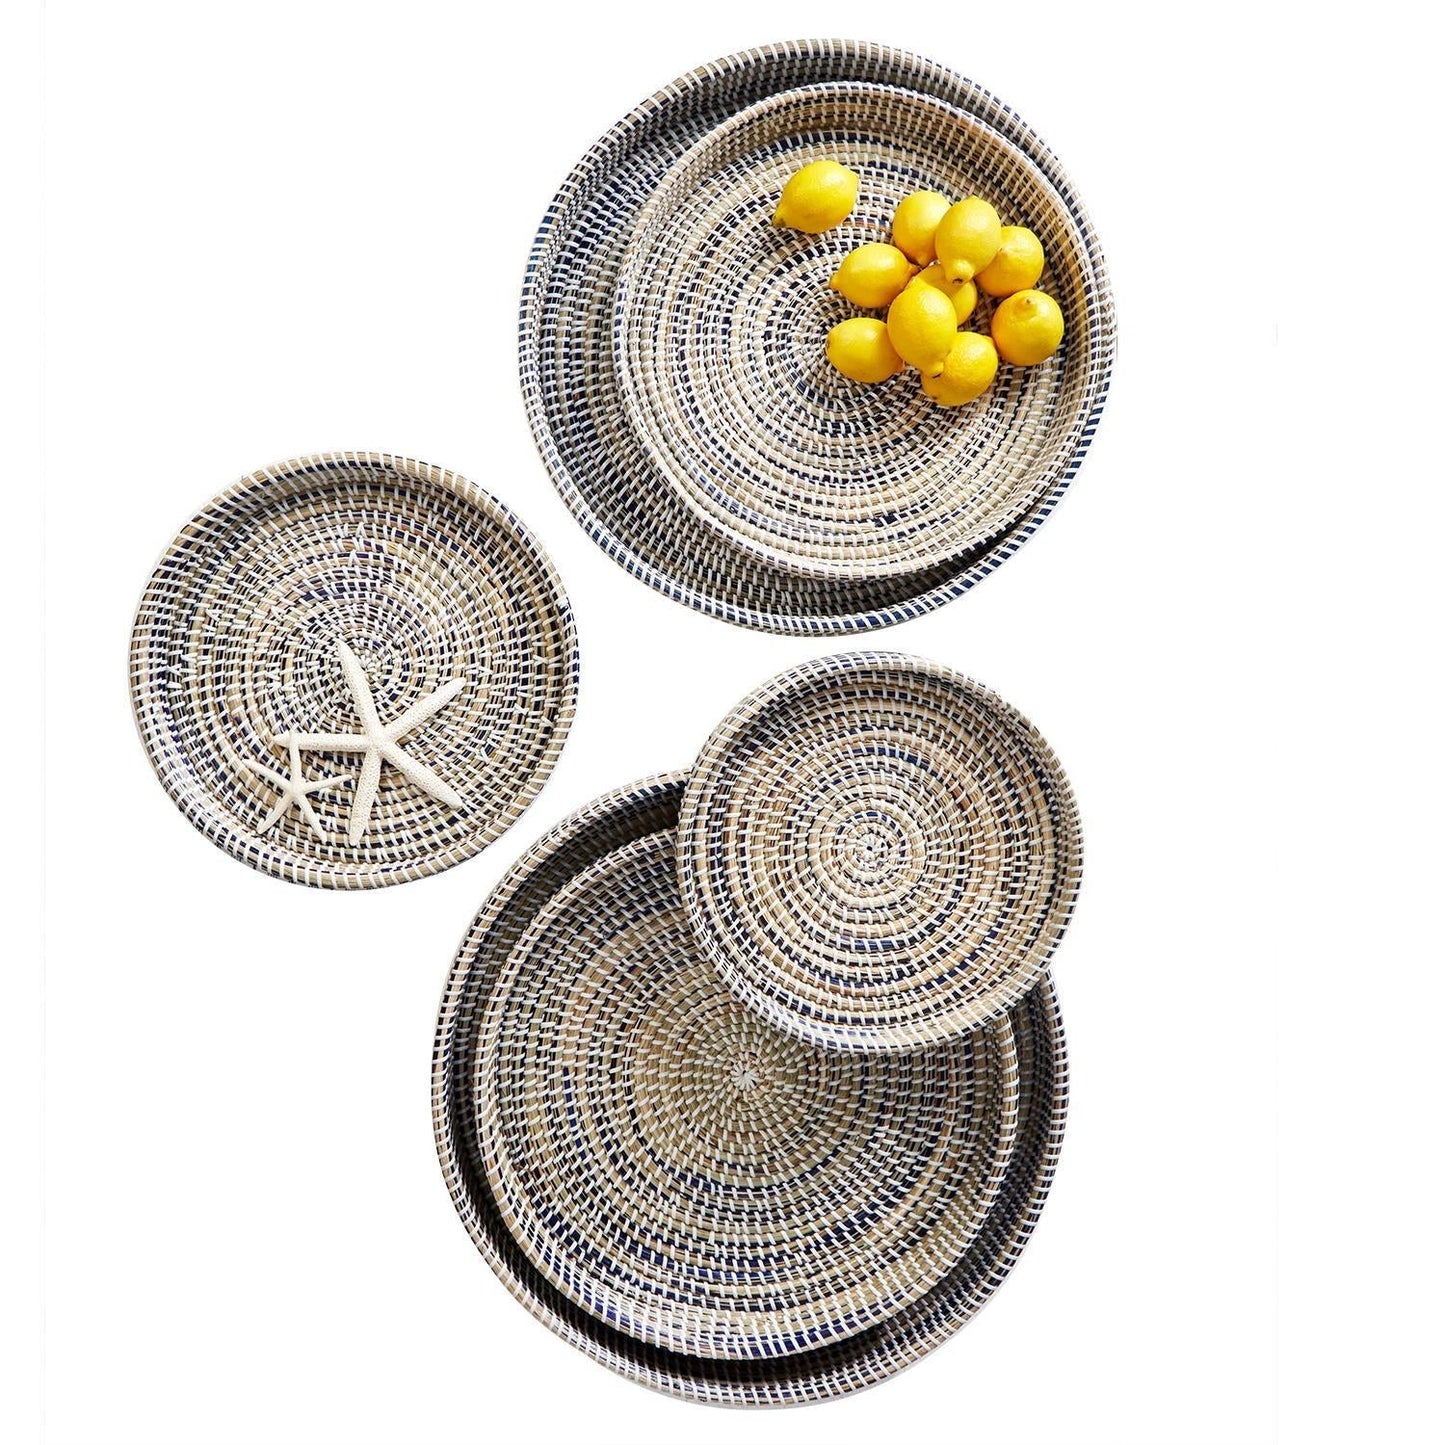 Woven Seagrass Round Tray in Natural, Blue and White - Mellow Monkey